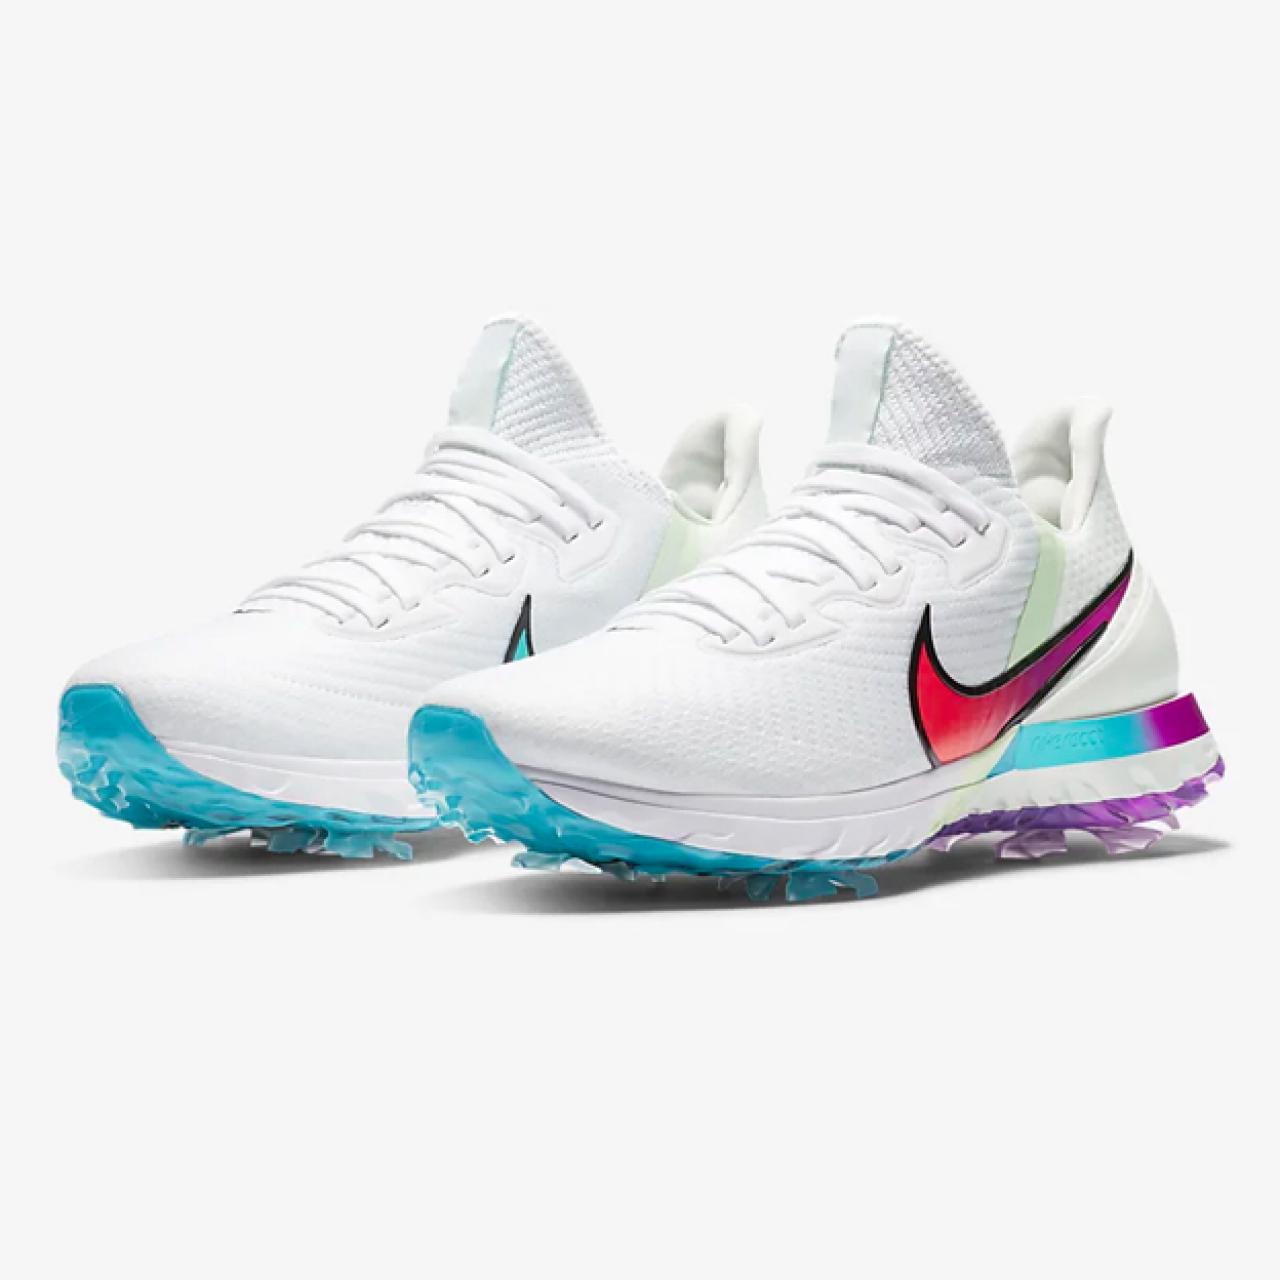 Nike releases three limited-edition NRG golf shoes with bold pops of color  | Golf Equipment: Clubs, Balls, Bags | Golf Digest